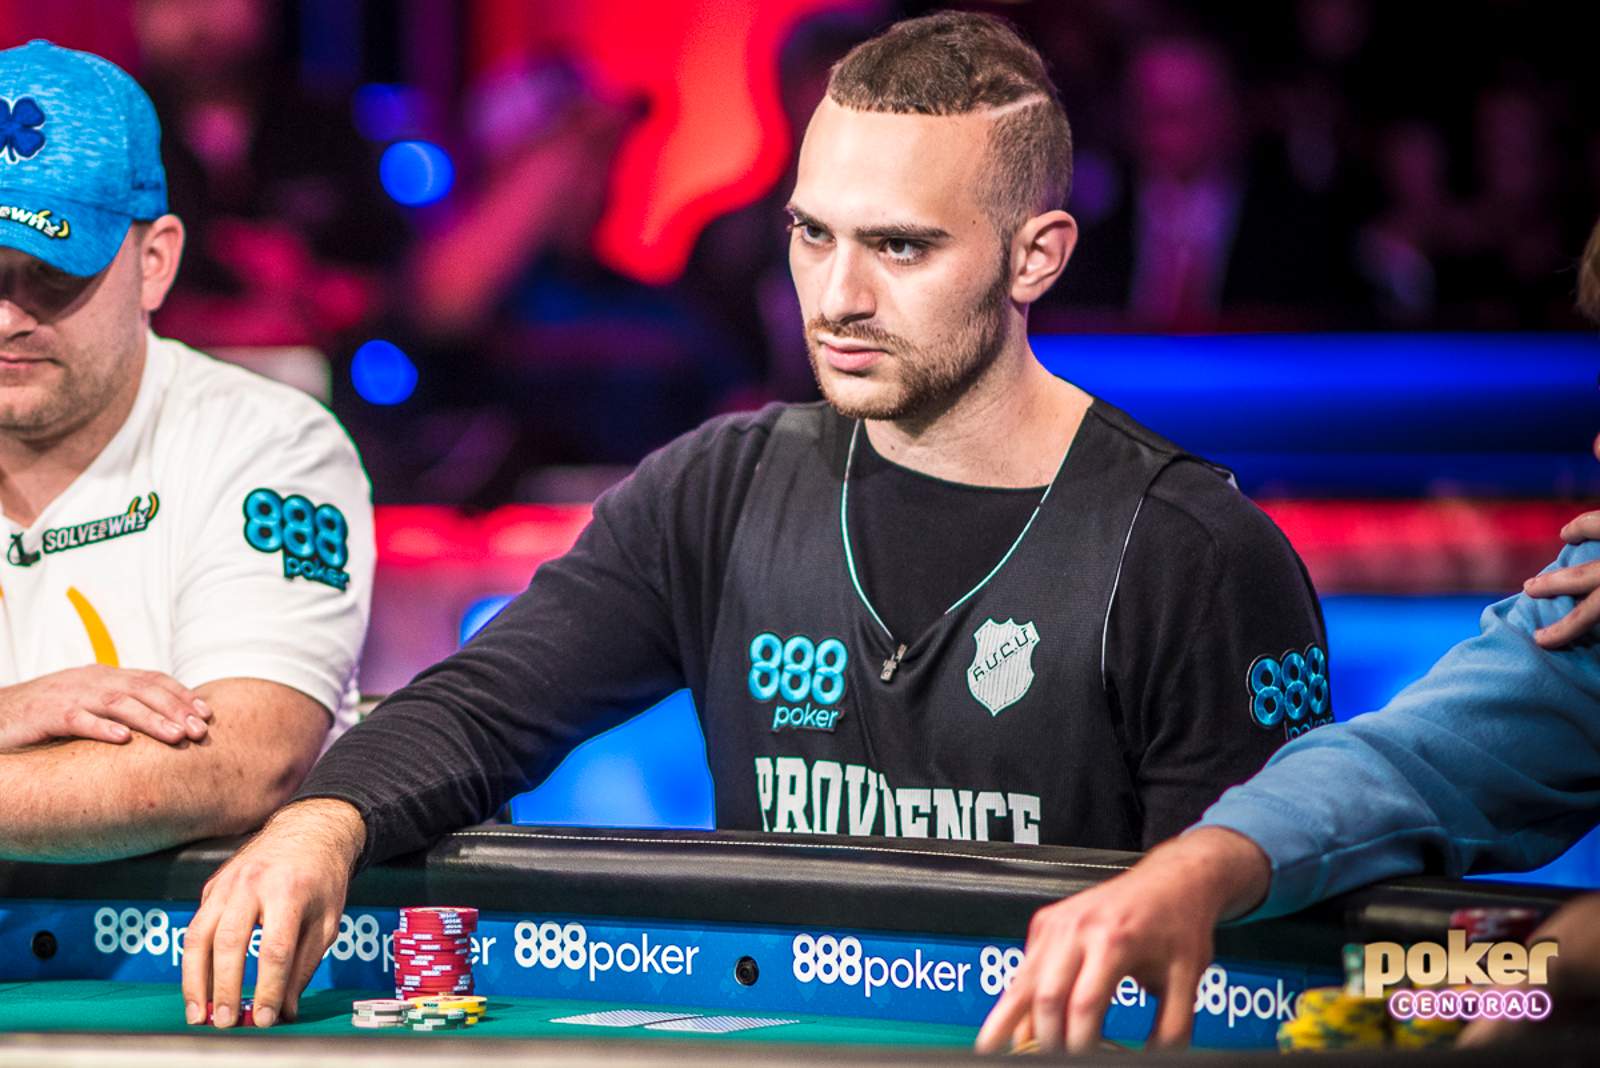 Hard Work Pays Off as Zobian Collects $1,850,000 in the WSOP Main Event